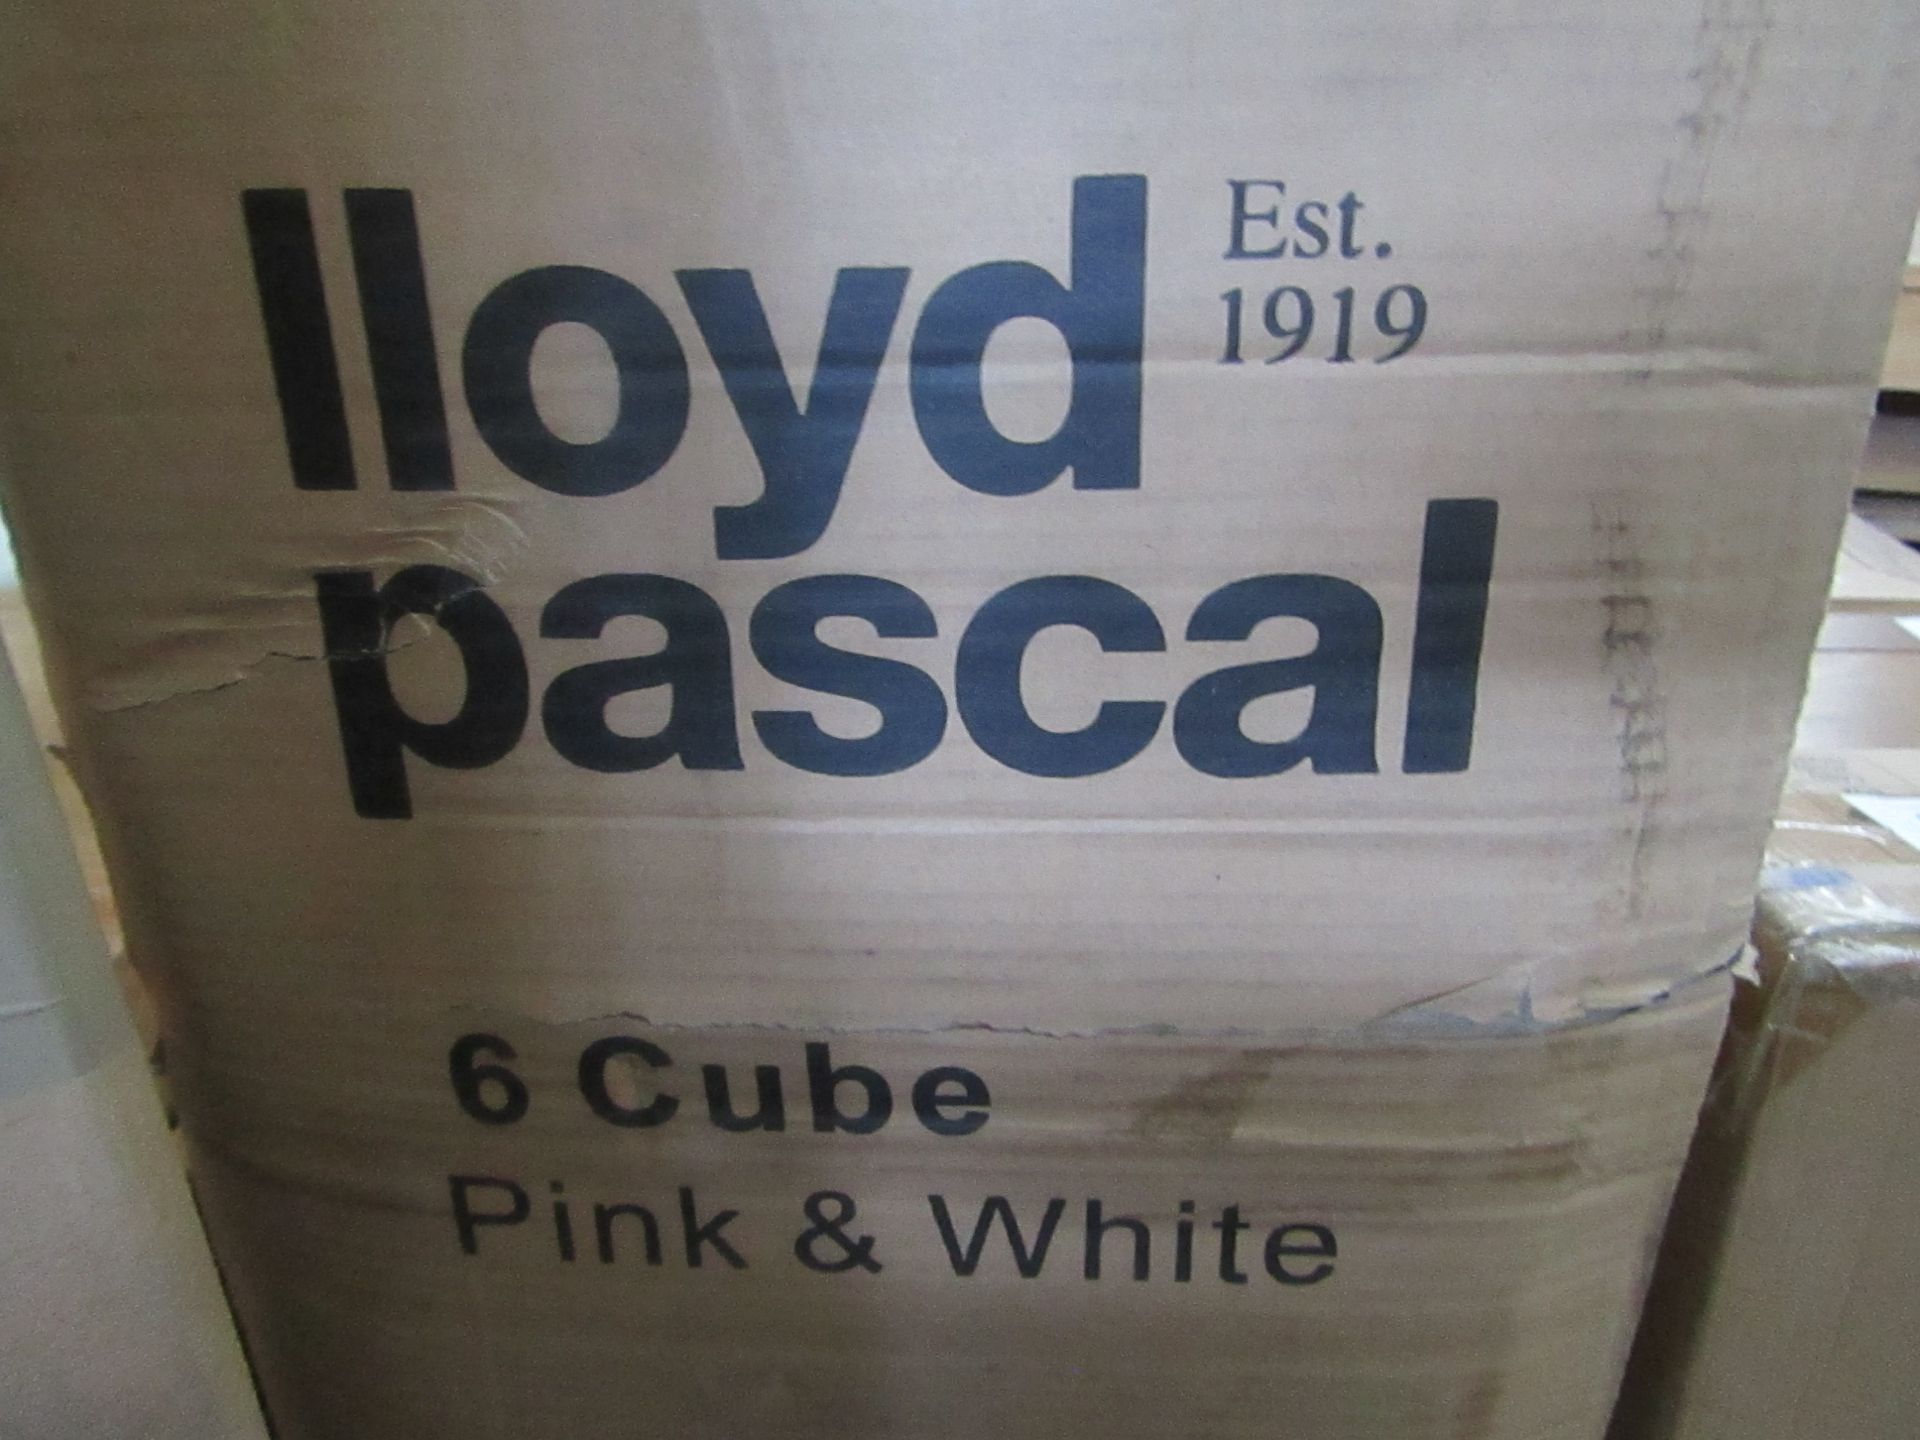 Lloyd Pascal - 6-Cube Unit - Pink & White - Unchecked & Boxed. - Image 2 of 2